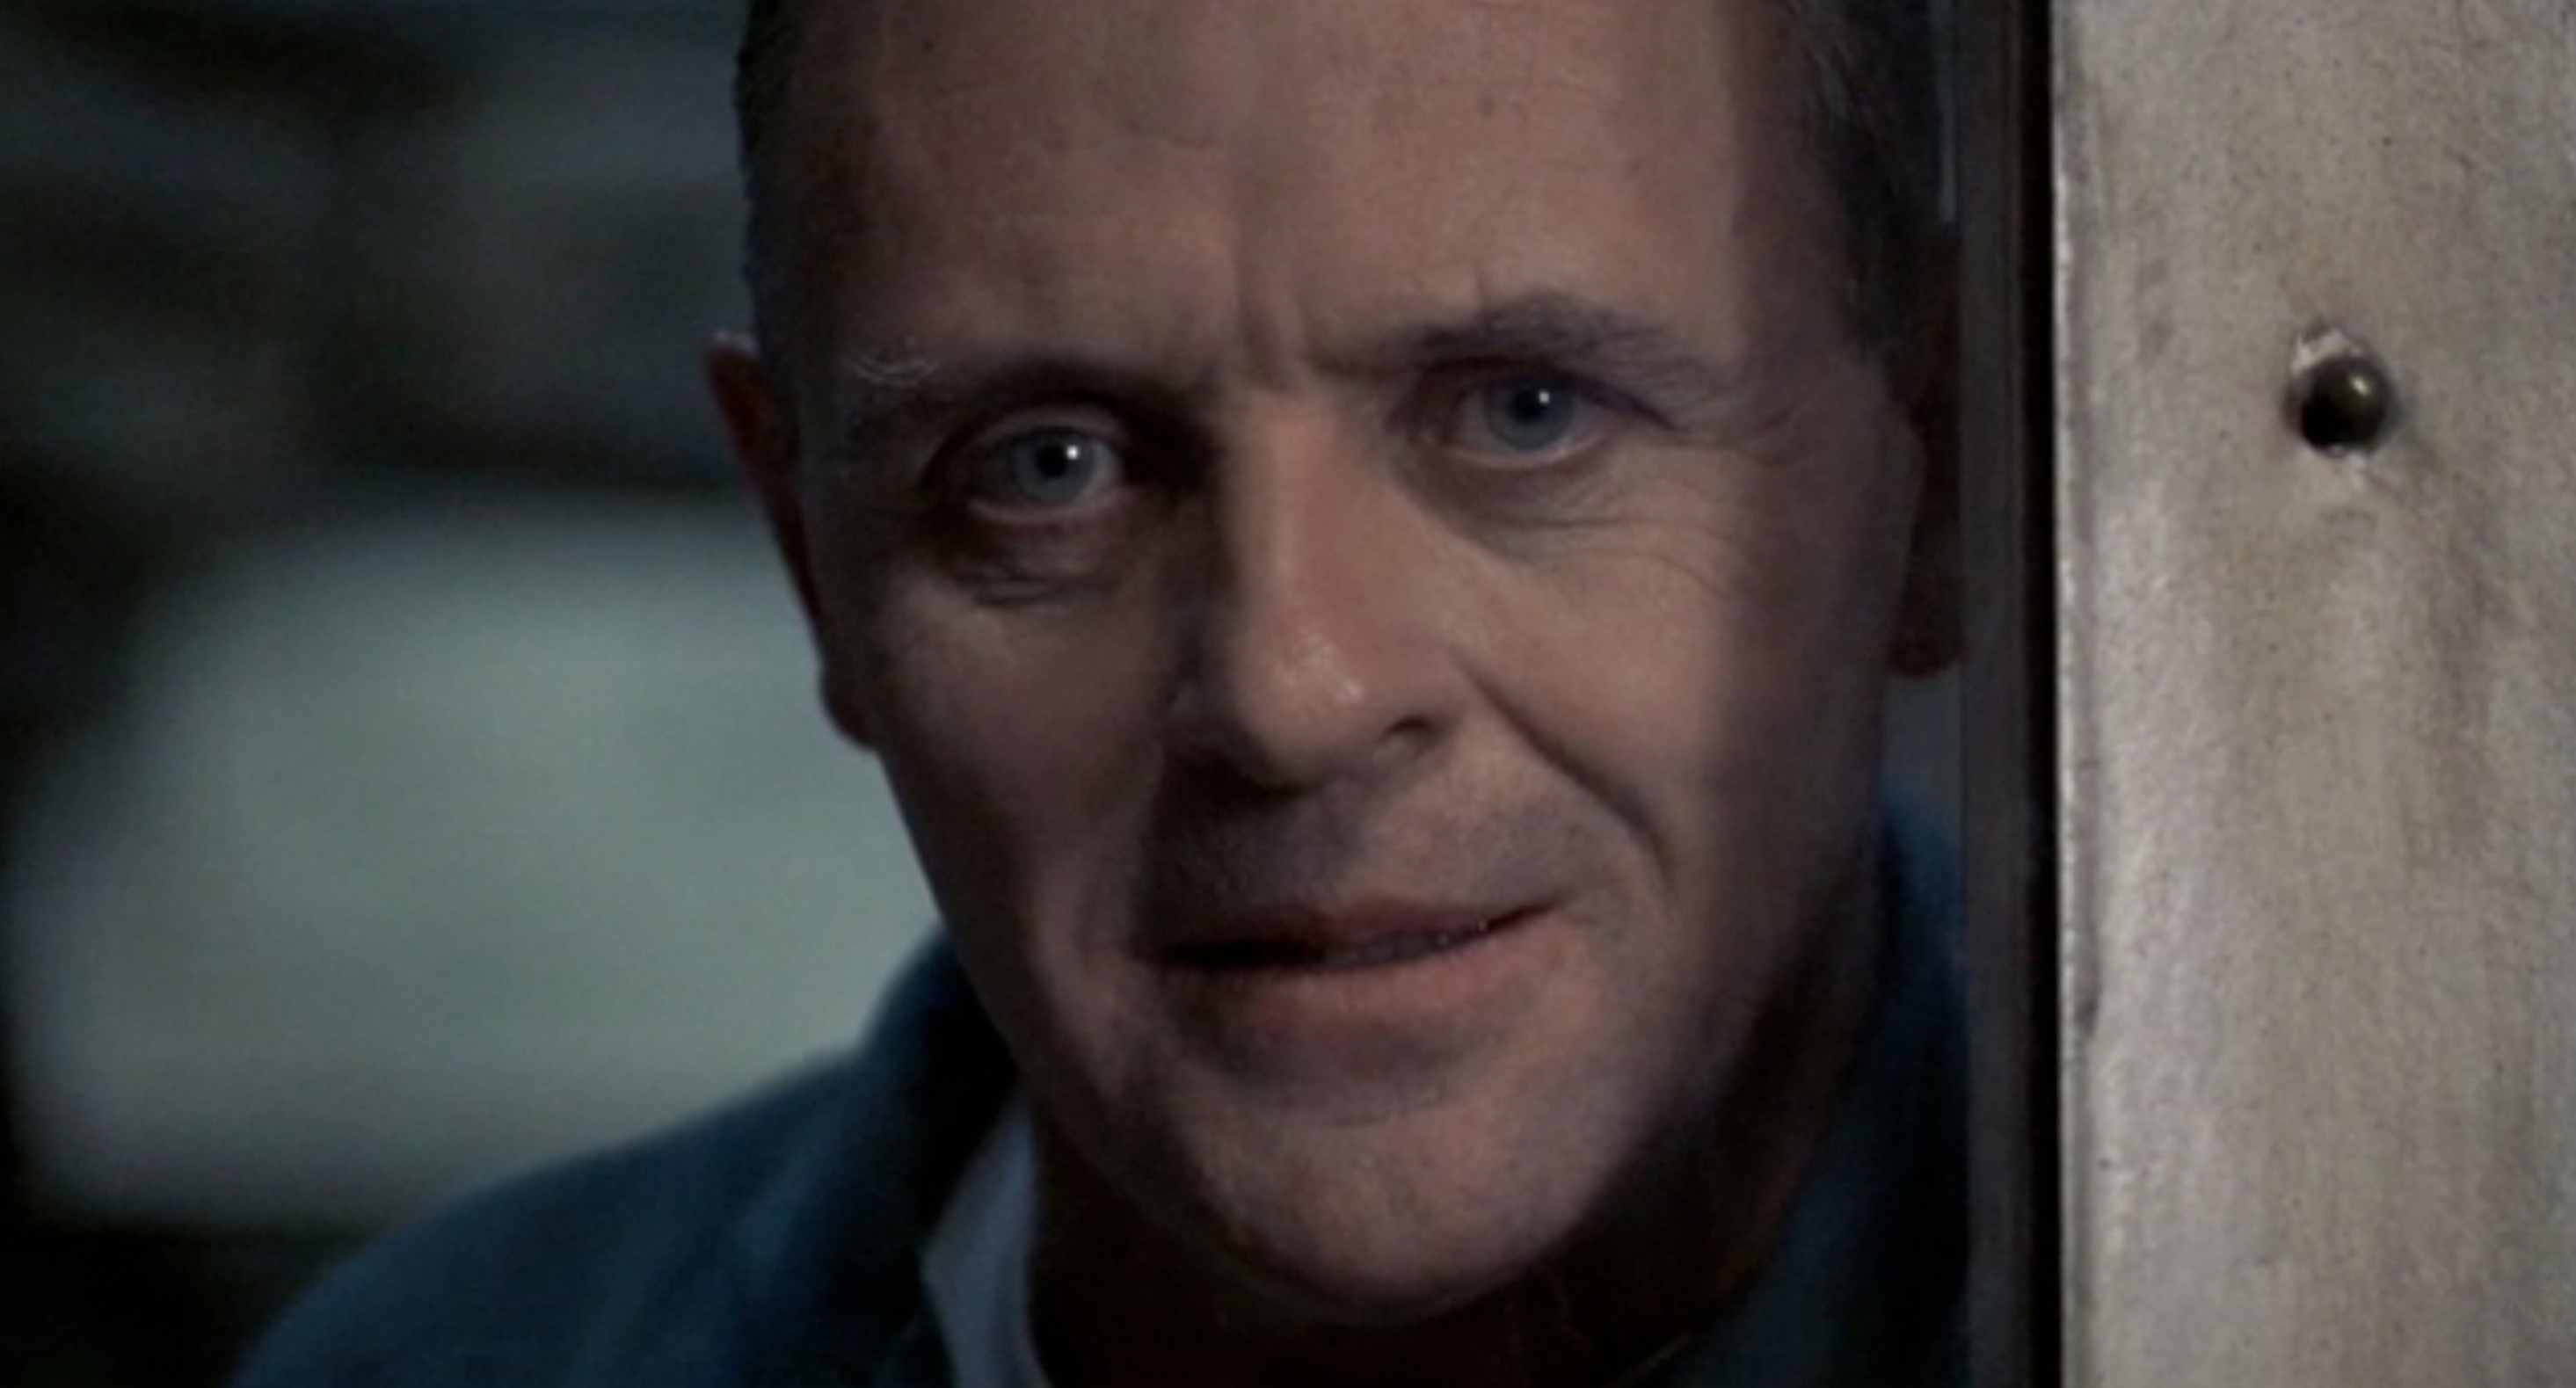 HD wallpaper, Bloody Jokes, Hilarious Movie Moment, 2930X1580 Hd Desktop, Thrilling Silence Of The Lambs, Hannibal Lecter Joke, Desktop Hd Hannibal Lecter Wallpaper Image